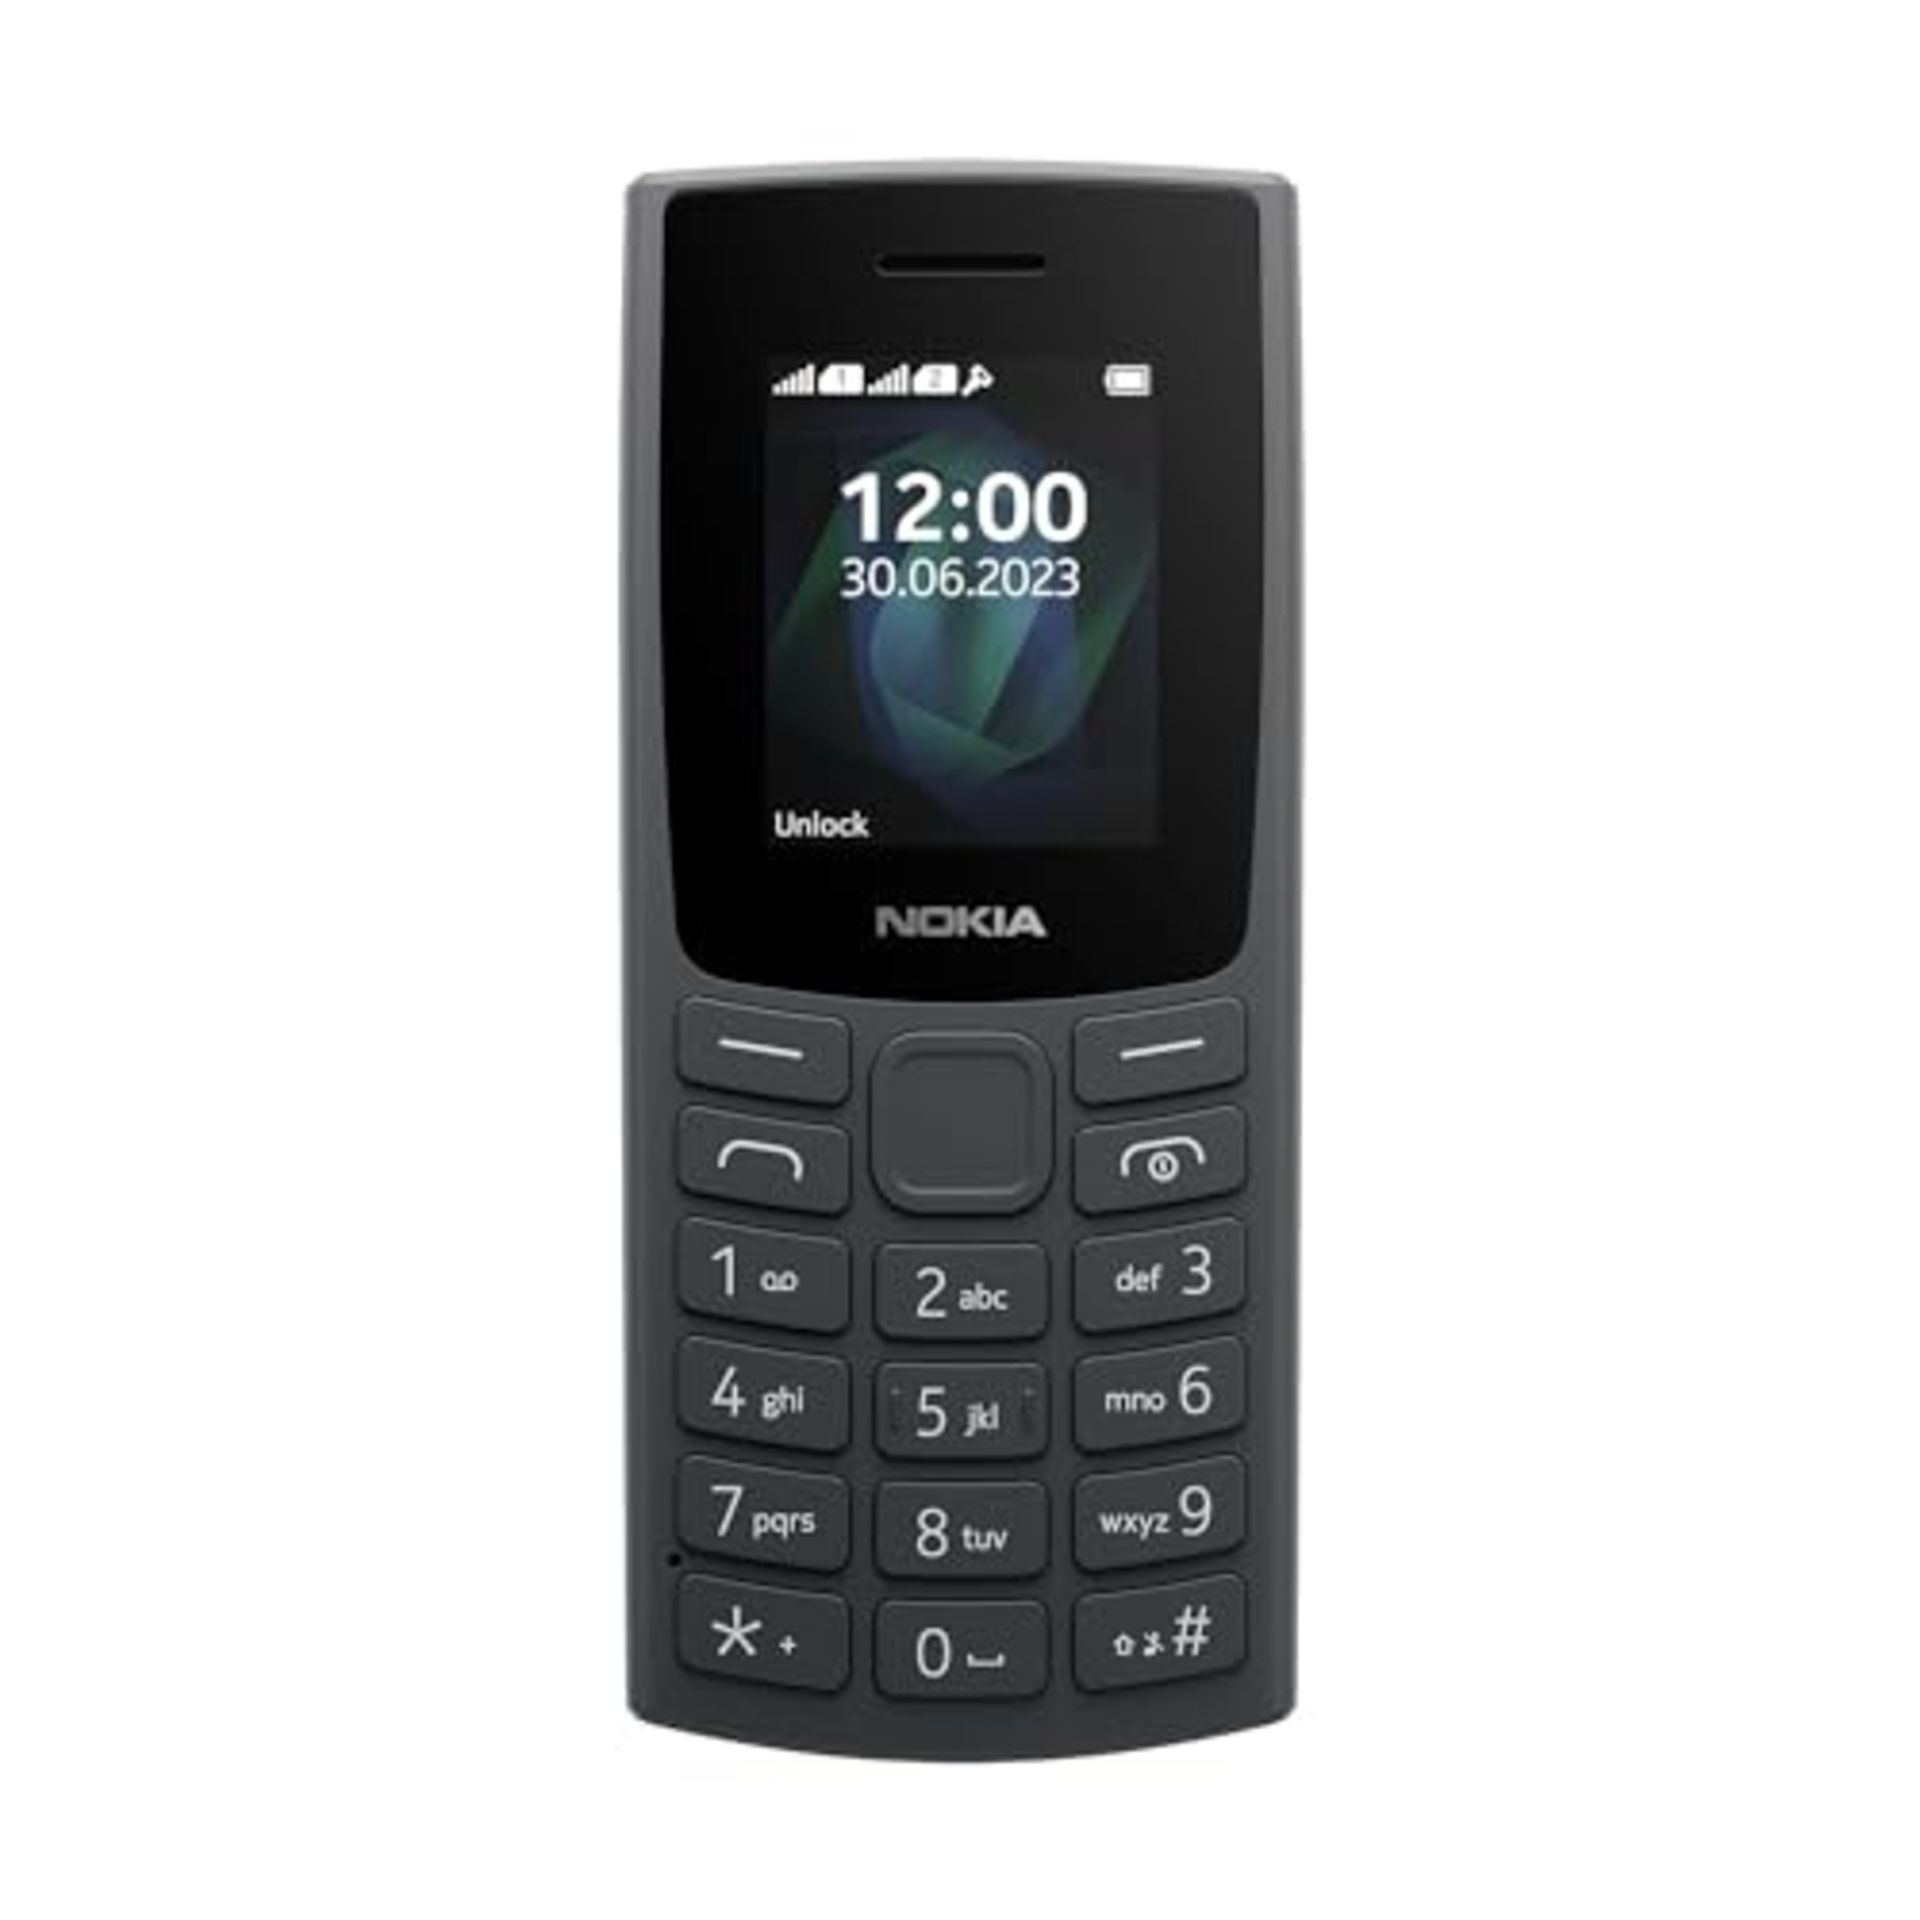 Nokia 105 2023 Dual Sim Cell Phone, 1.8" Color Display, Charcoal (Charcoal) [Italy] - Image 4 of 6